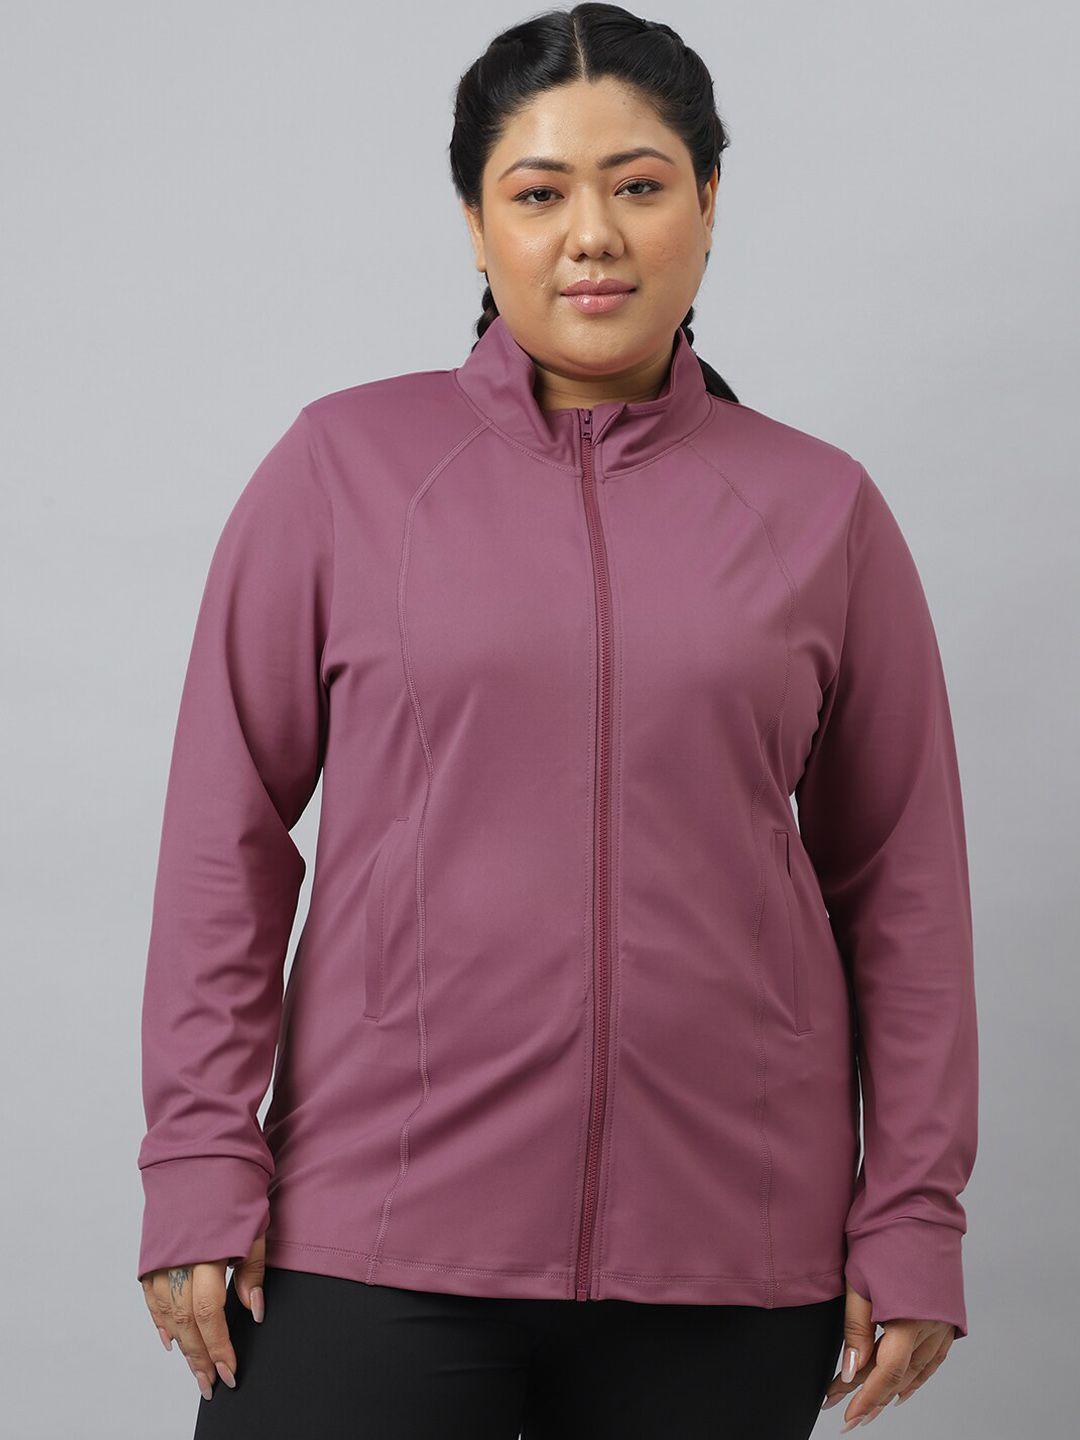 fitkin women mauve lightweight training or gym sporty jacket